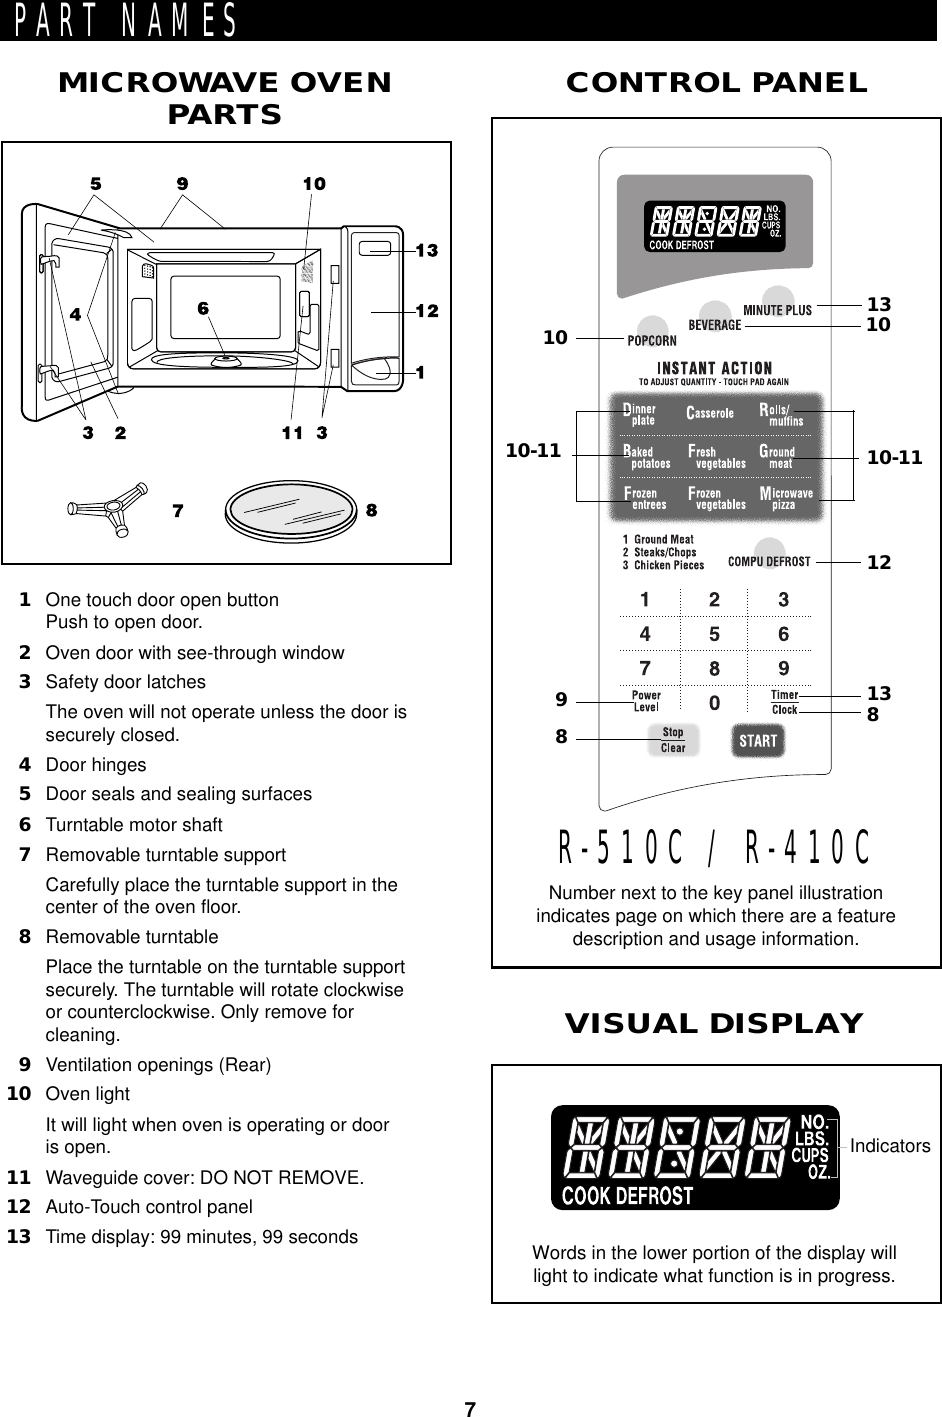 7PART NAMES1One touch door open buttonPush to open door.2Oven door with see-through window3Safety door latchesThe oven will not operate unless the door issecurely closed.4Door hinges5Door seals and sealing surfaces6Turntable motor shaft7Removable turntable supportCarefully place the turntable support in thecenter of the oven floor.8Removable turntablePlace the turntable on the turntable supportsecurely. The turntable will rotate clockwiseor counterclockwise. Only remove forcleaning.9Ventilation openings (Rear)10 Oven lightIt will light when oven is operating or dooris open.11 Waveguide cover: DO NOT REMOVE.12 Auto-Touch control panel13 Time display: 99 minutes, 99 secondsMICROWAVE OVENPARTSNumber next to the key panel illustrationindicates page on which there are a featuredescription and usage information.R-510C / R-410CCONTROL PANELVISUAL DISPLAYWords in the lower portion of the display willlight to indicate what function is in progress.Indicators10-11139810-11121381010